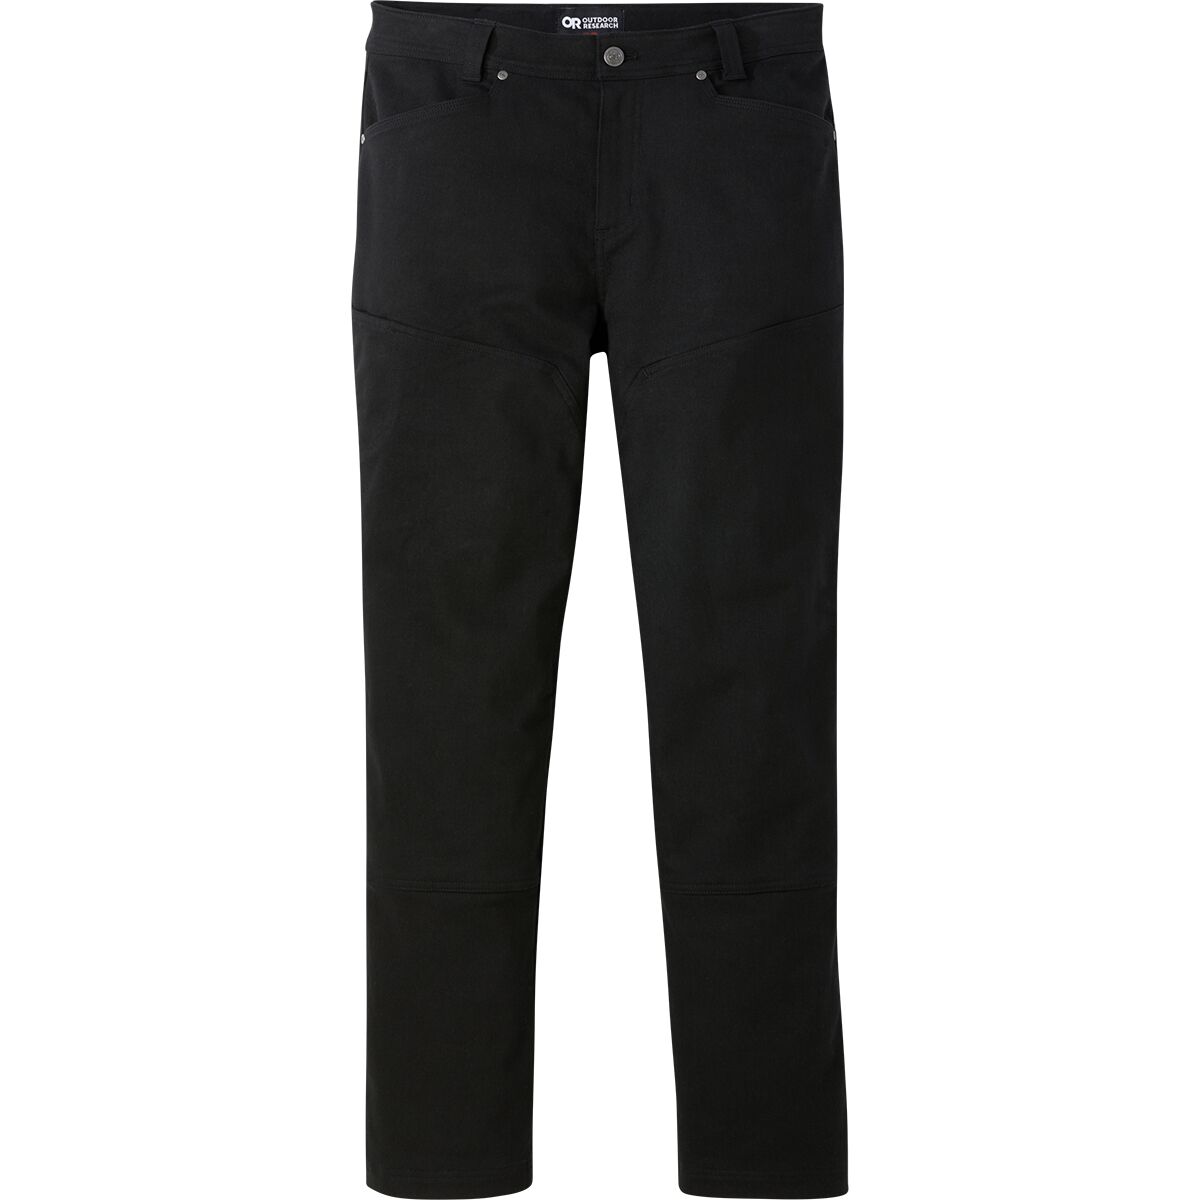 Outdoor Research Lined Work Pant - Men's